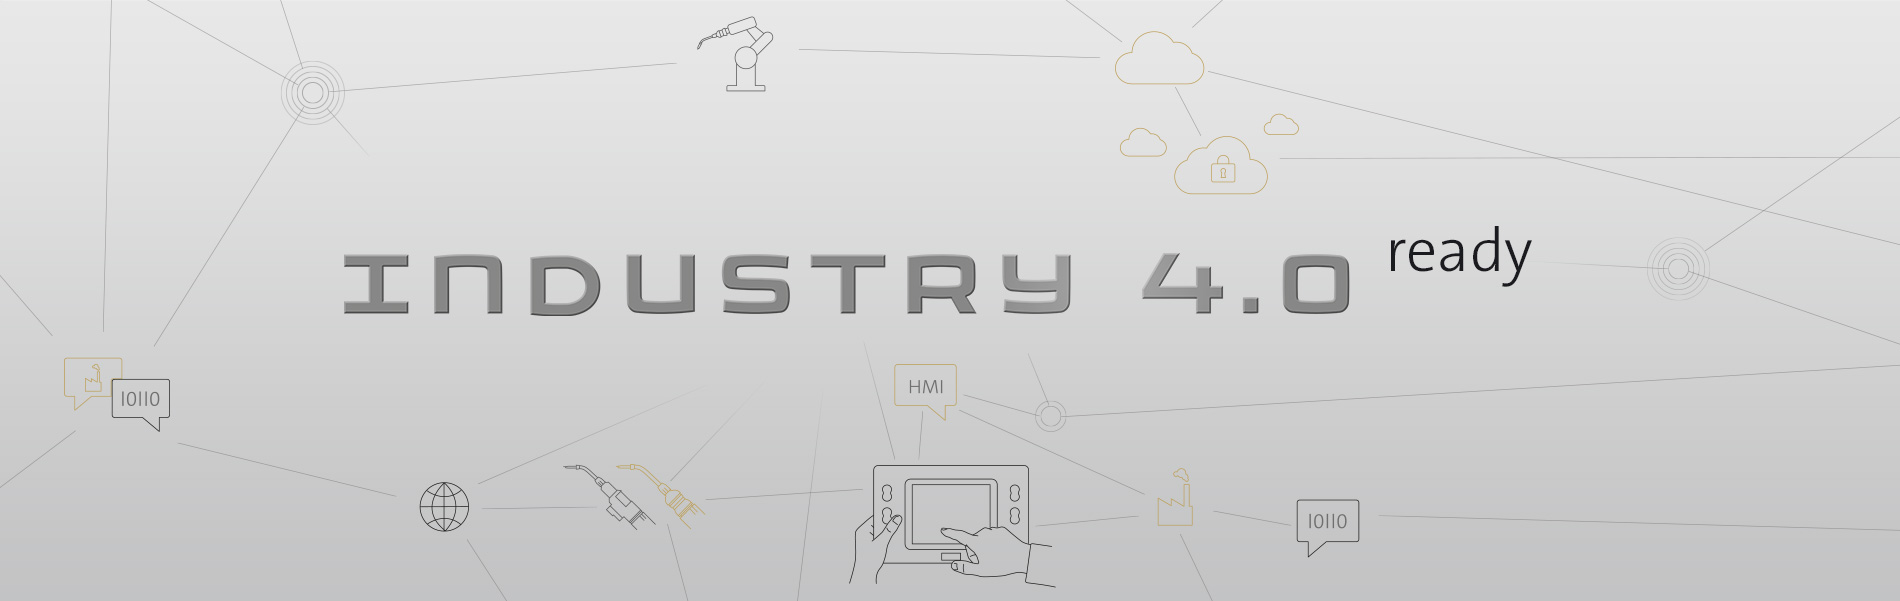 SKS Forschung & Entwicklung – Industry 4.0 ready